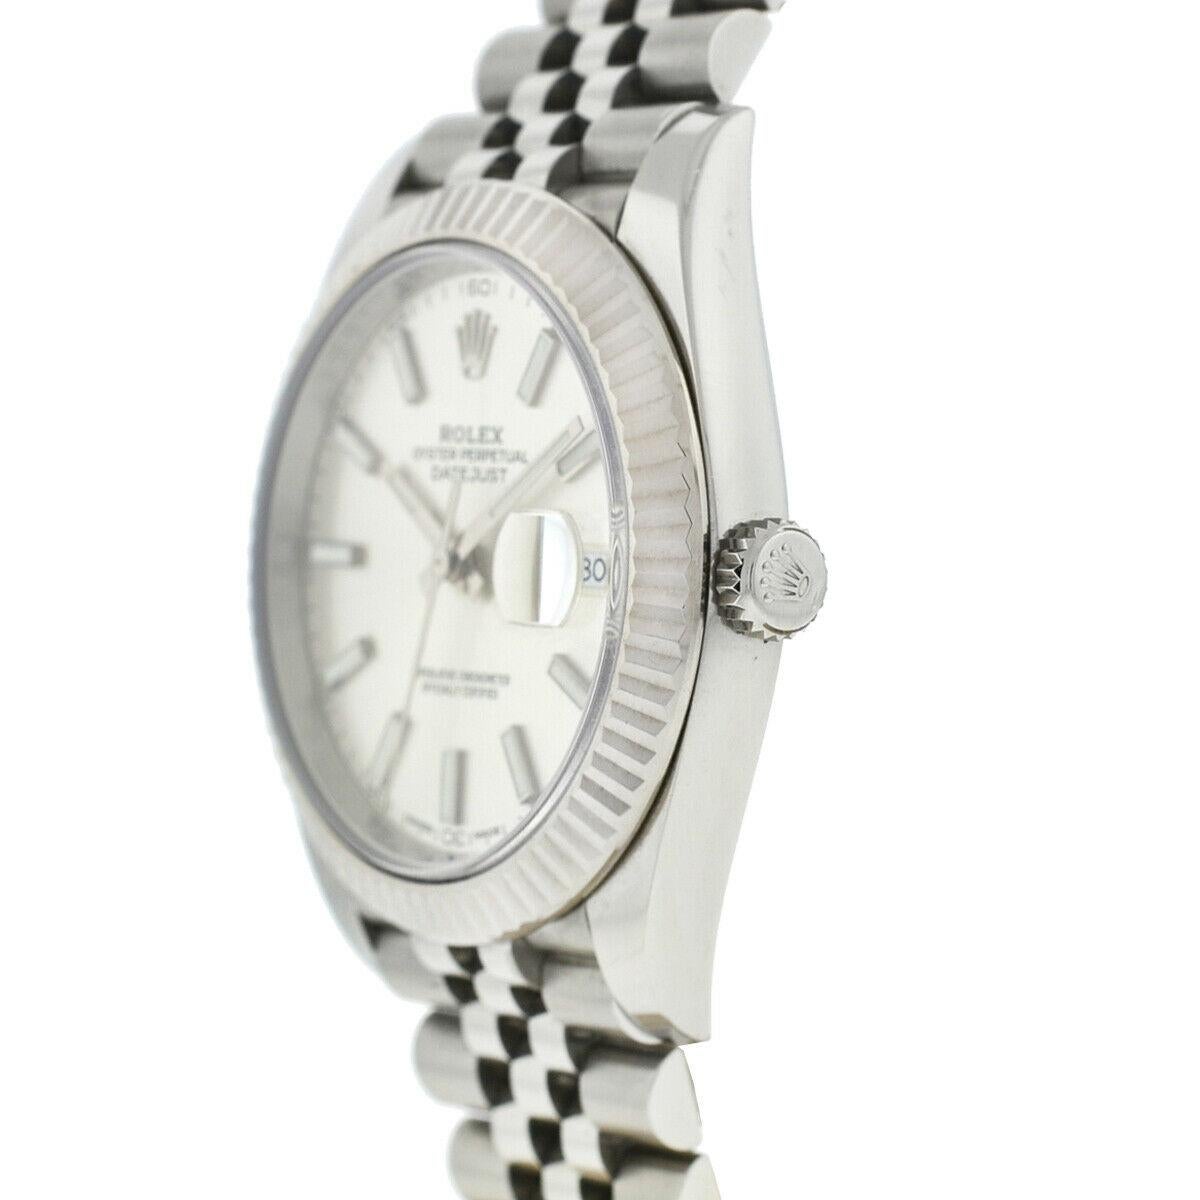 Rolex Silver 126334 Datejust 41 Dial White Gold Jubilee Watch 2